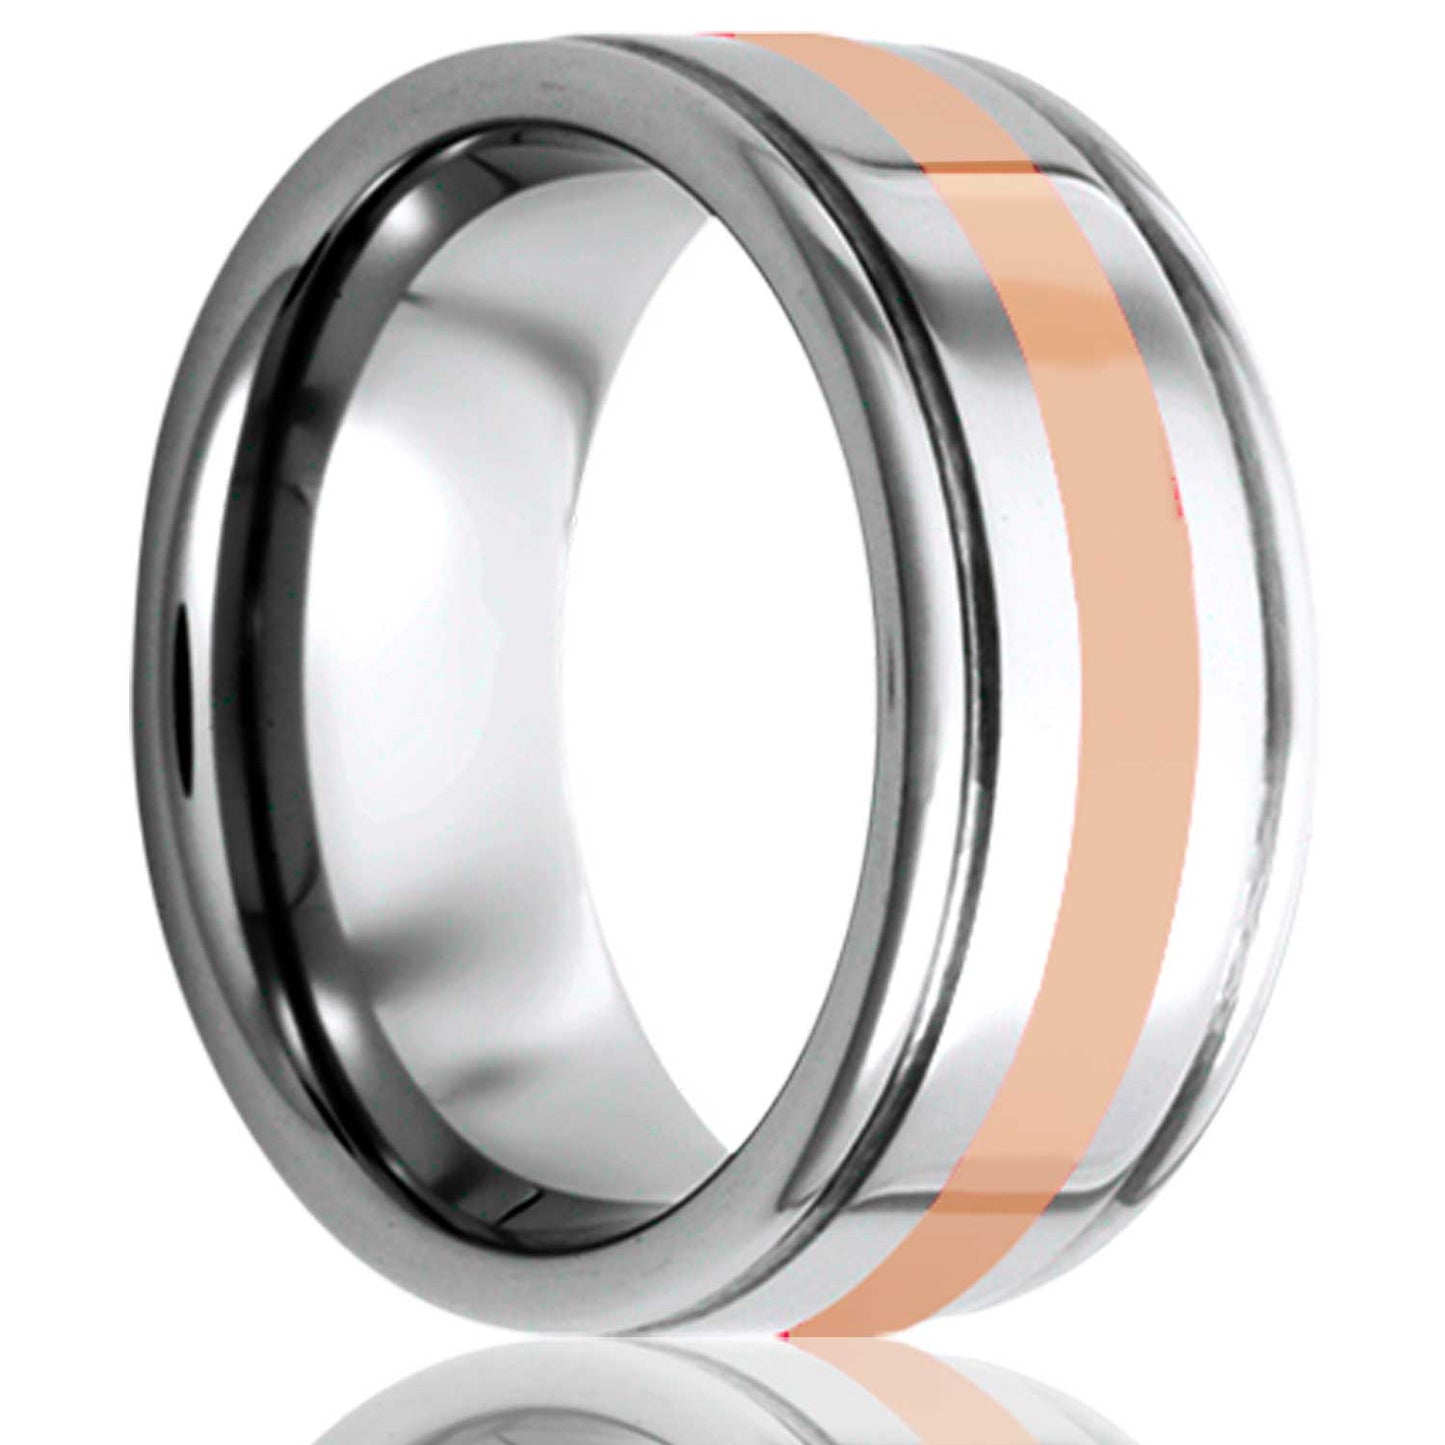 A 14k rose gold inlay cobalt wedding band with grooved edges displayed on a neutral white background.